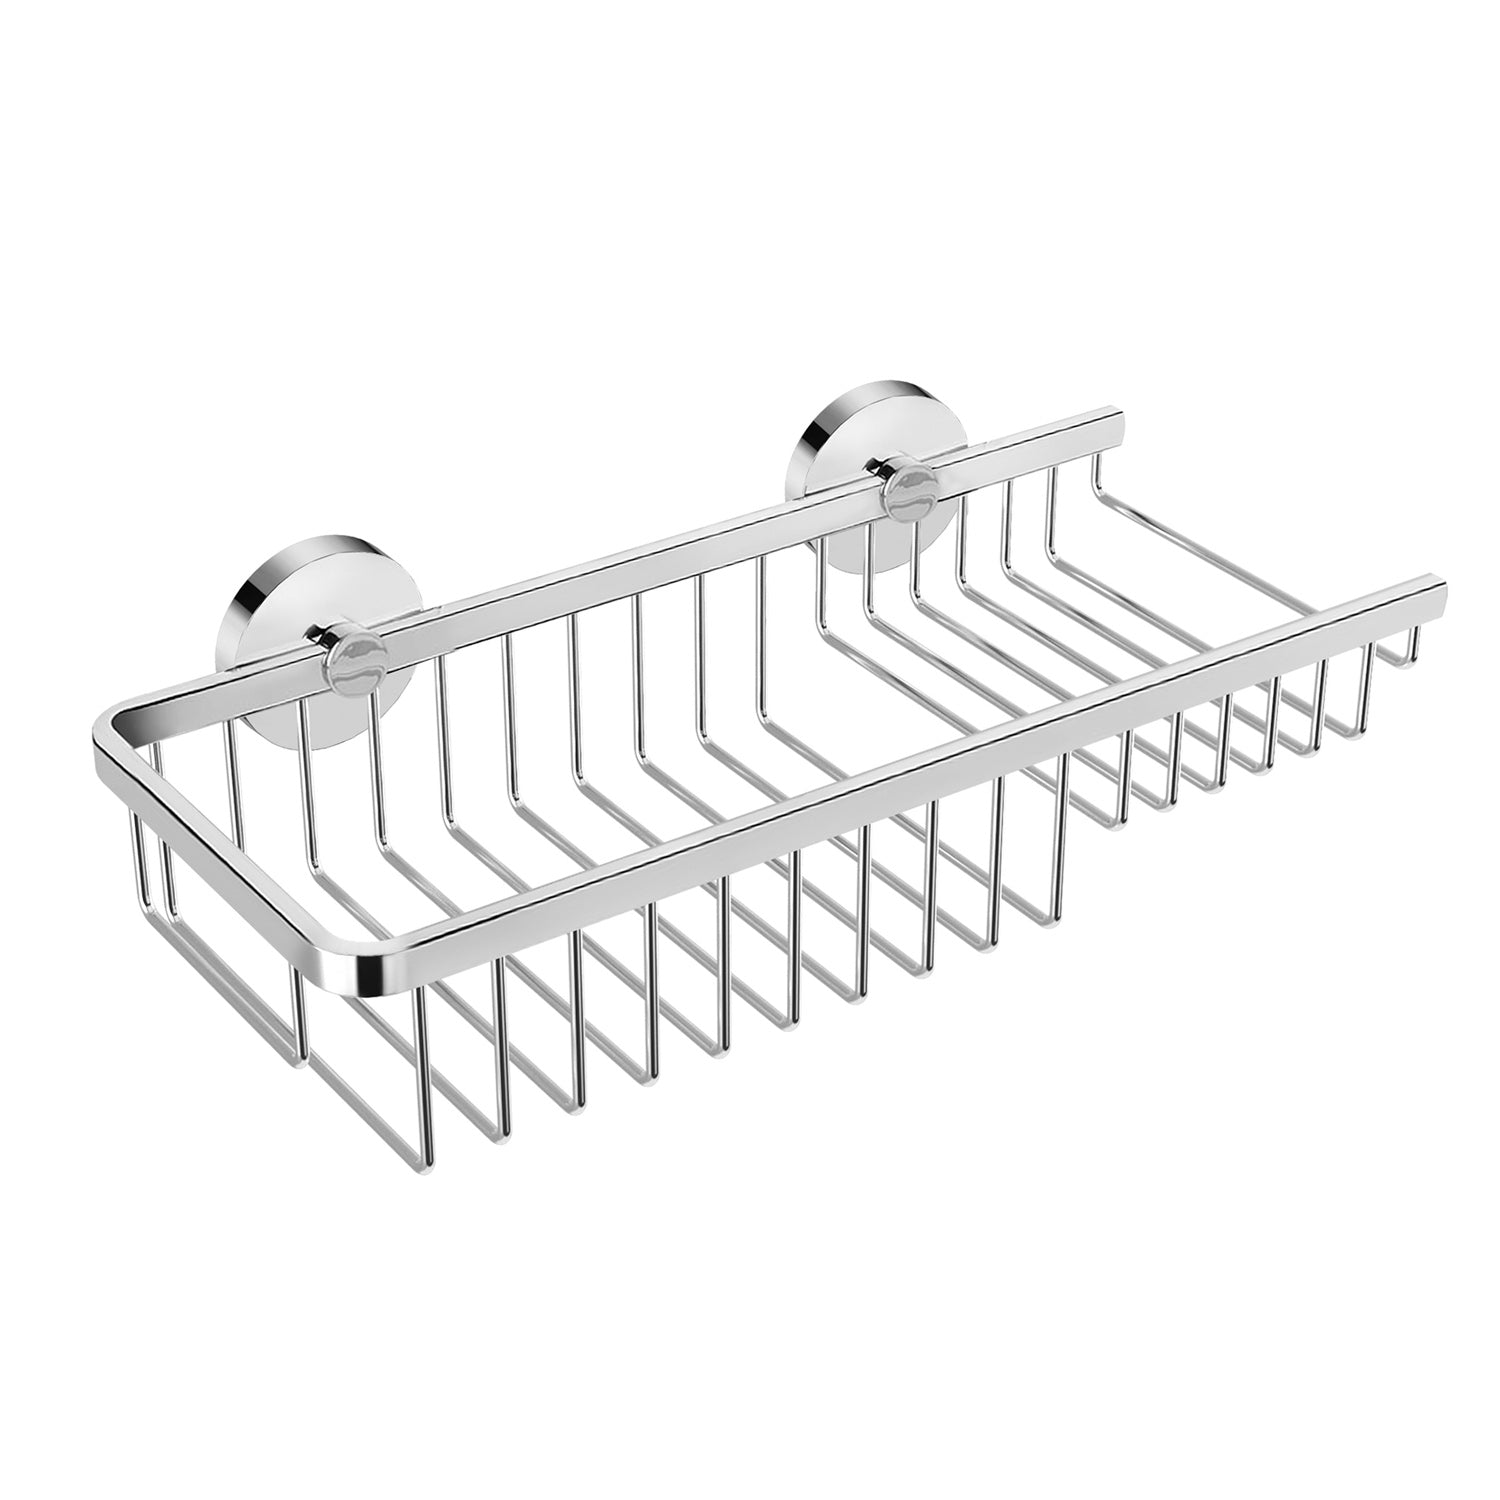 DAX Valencia Bathroom Shelf Basket with Right Opening, Wall Mount, Stainless Steel, Chrome Finish, 11-13/16 x 5-5/16 x 3-1/8 Inches (DAX-GDC120187-CR)